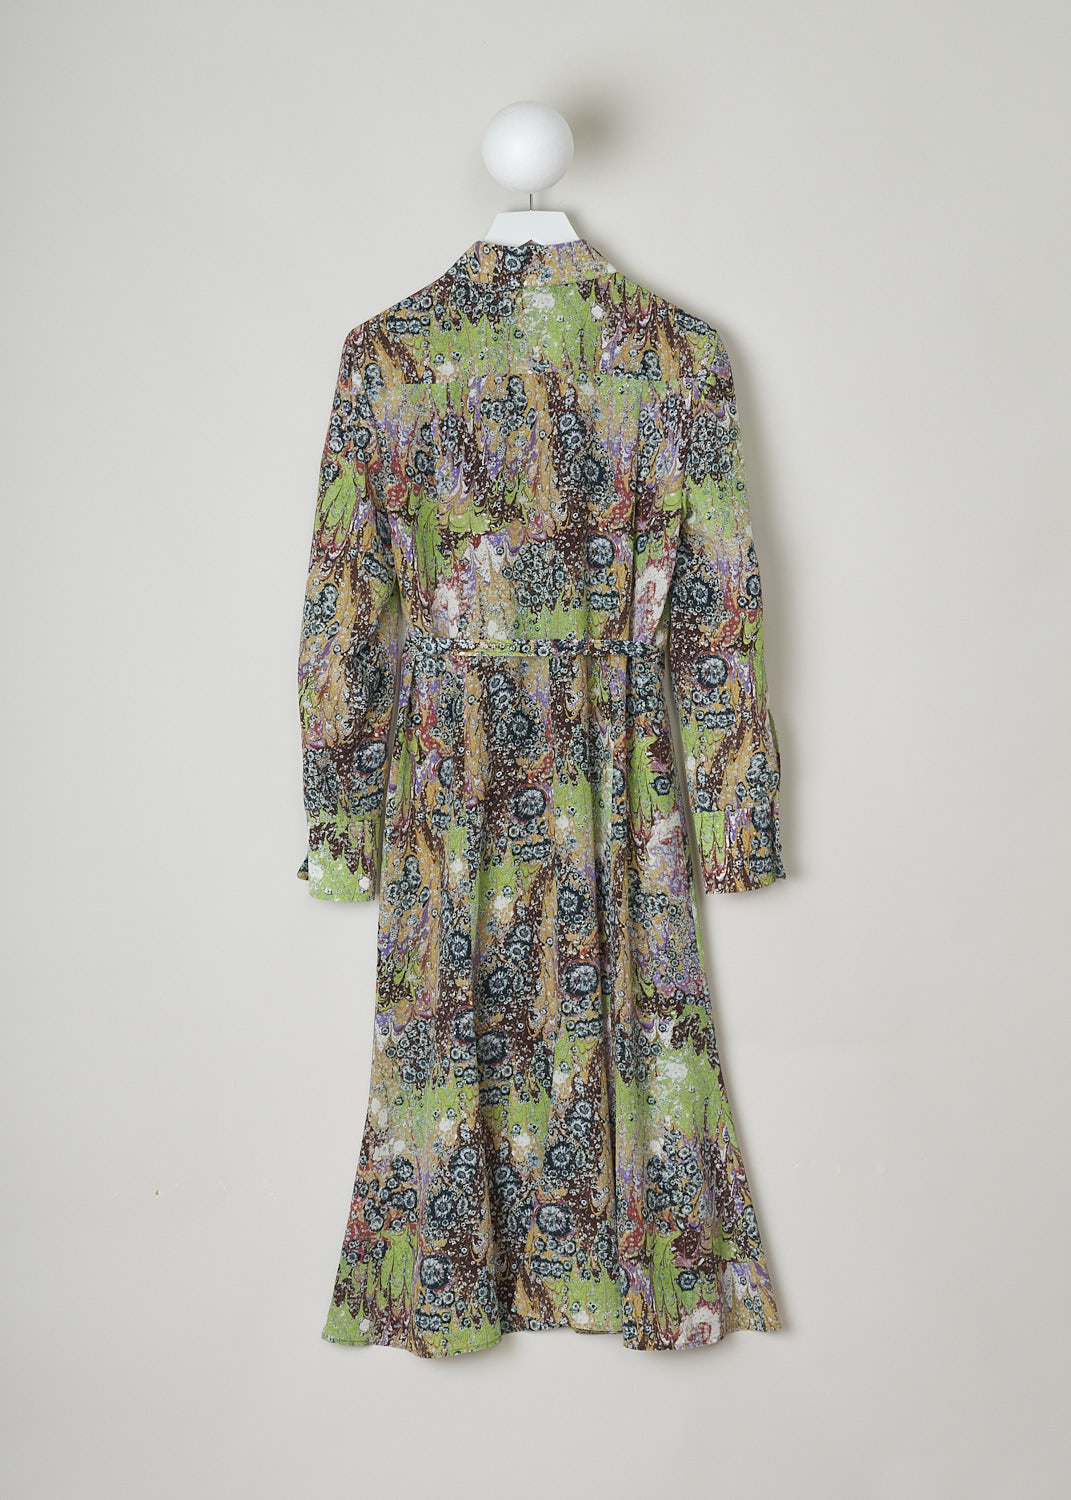 CHLOÃ‰, MULTICOLOR PRINTED SHIRT DRESS WITH BELT, CHC21WRO363053ZA_MULTICOLOR_GREEN, Print, Green, Brown, Back, This silk shirt dress has an all-over multicolored print. The dress has a pointed collar and a concealed front button closure. The long sleeves have buttoned cuffs. The midi-length skirt flares out. The dress comes with a narrow belt in the same fabric.   
